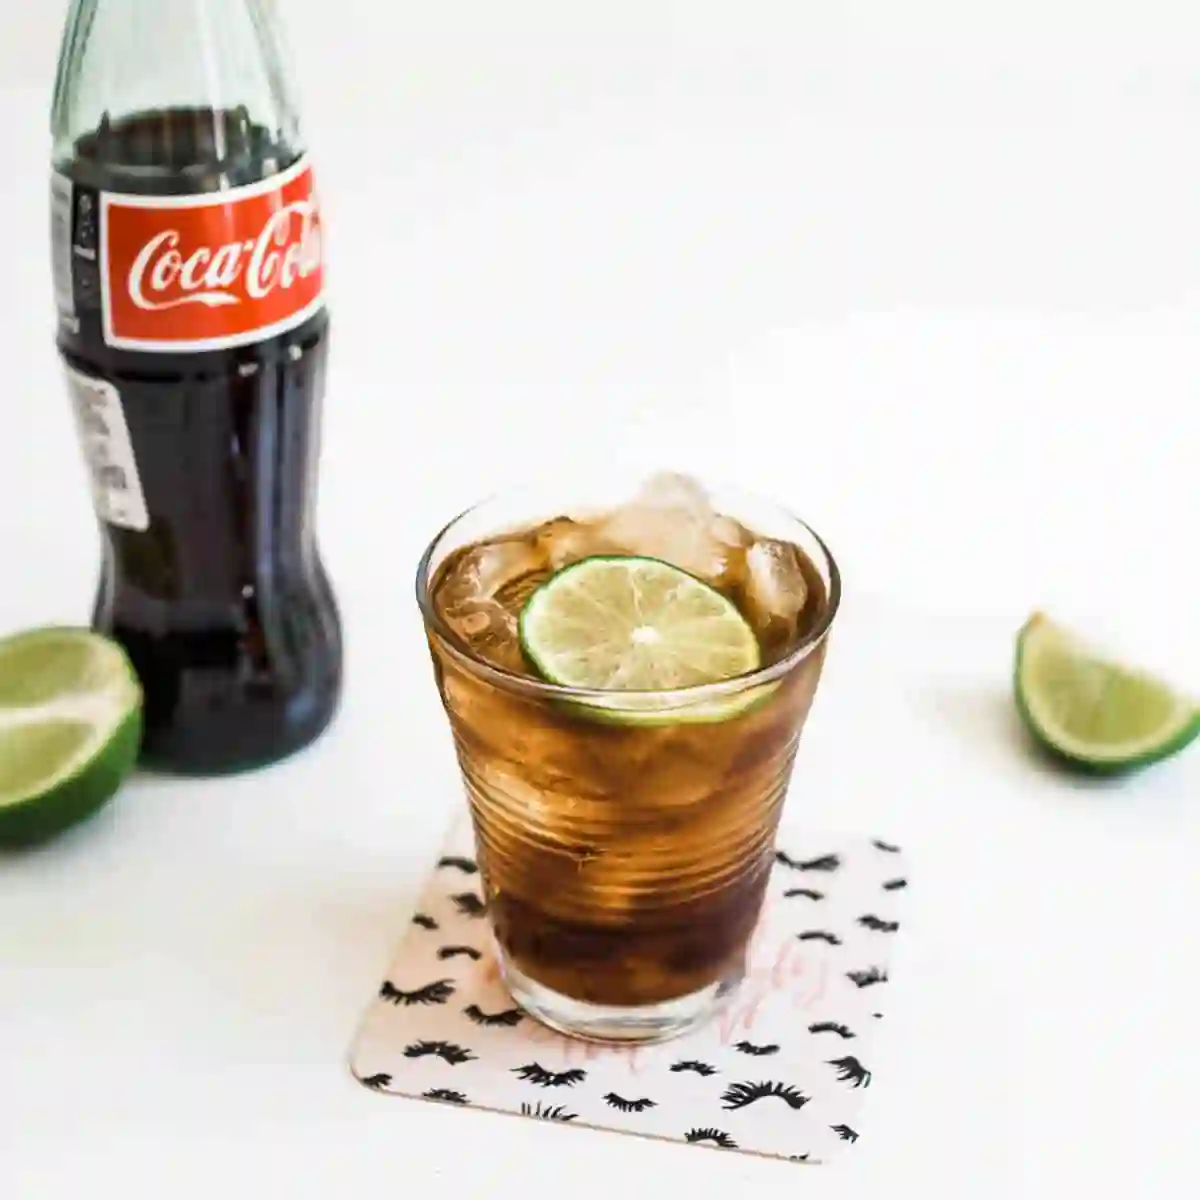 vodka-and-coke-featured-image